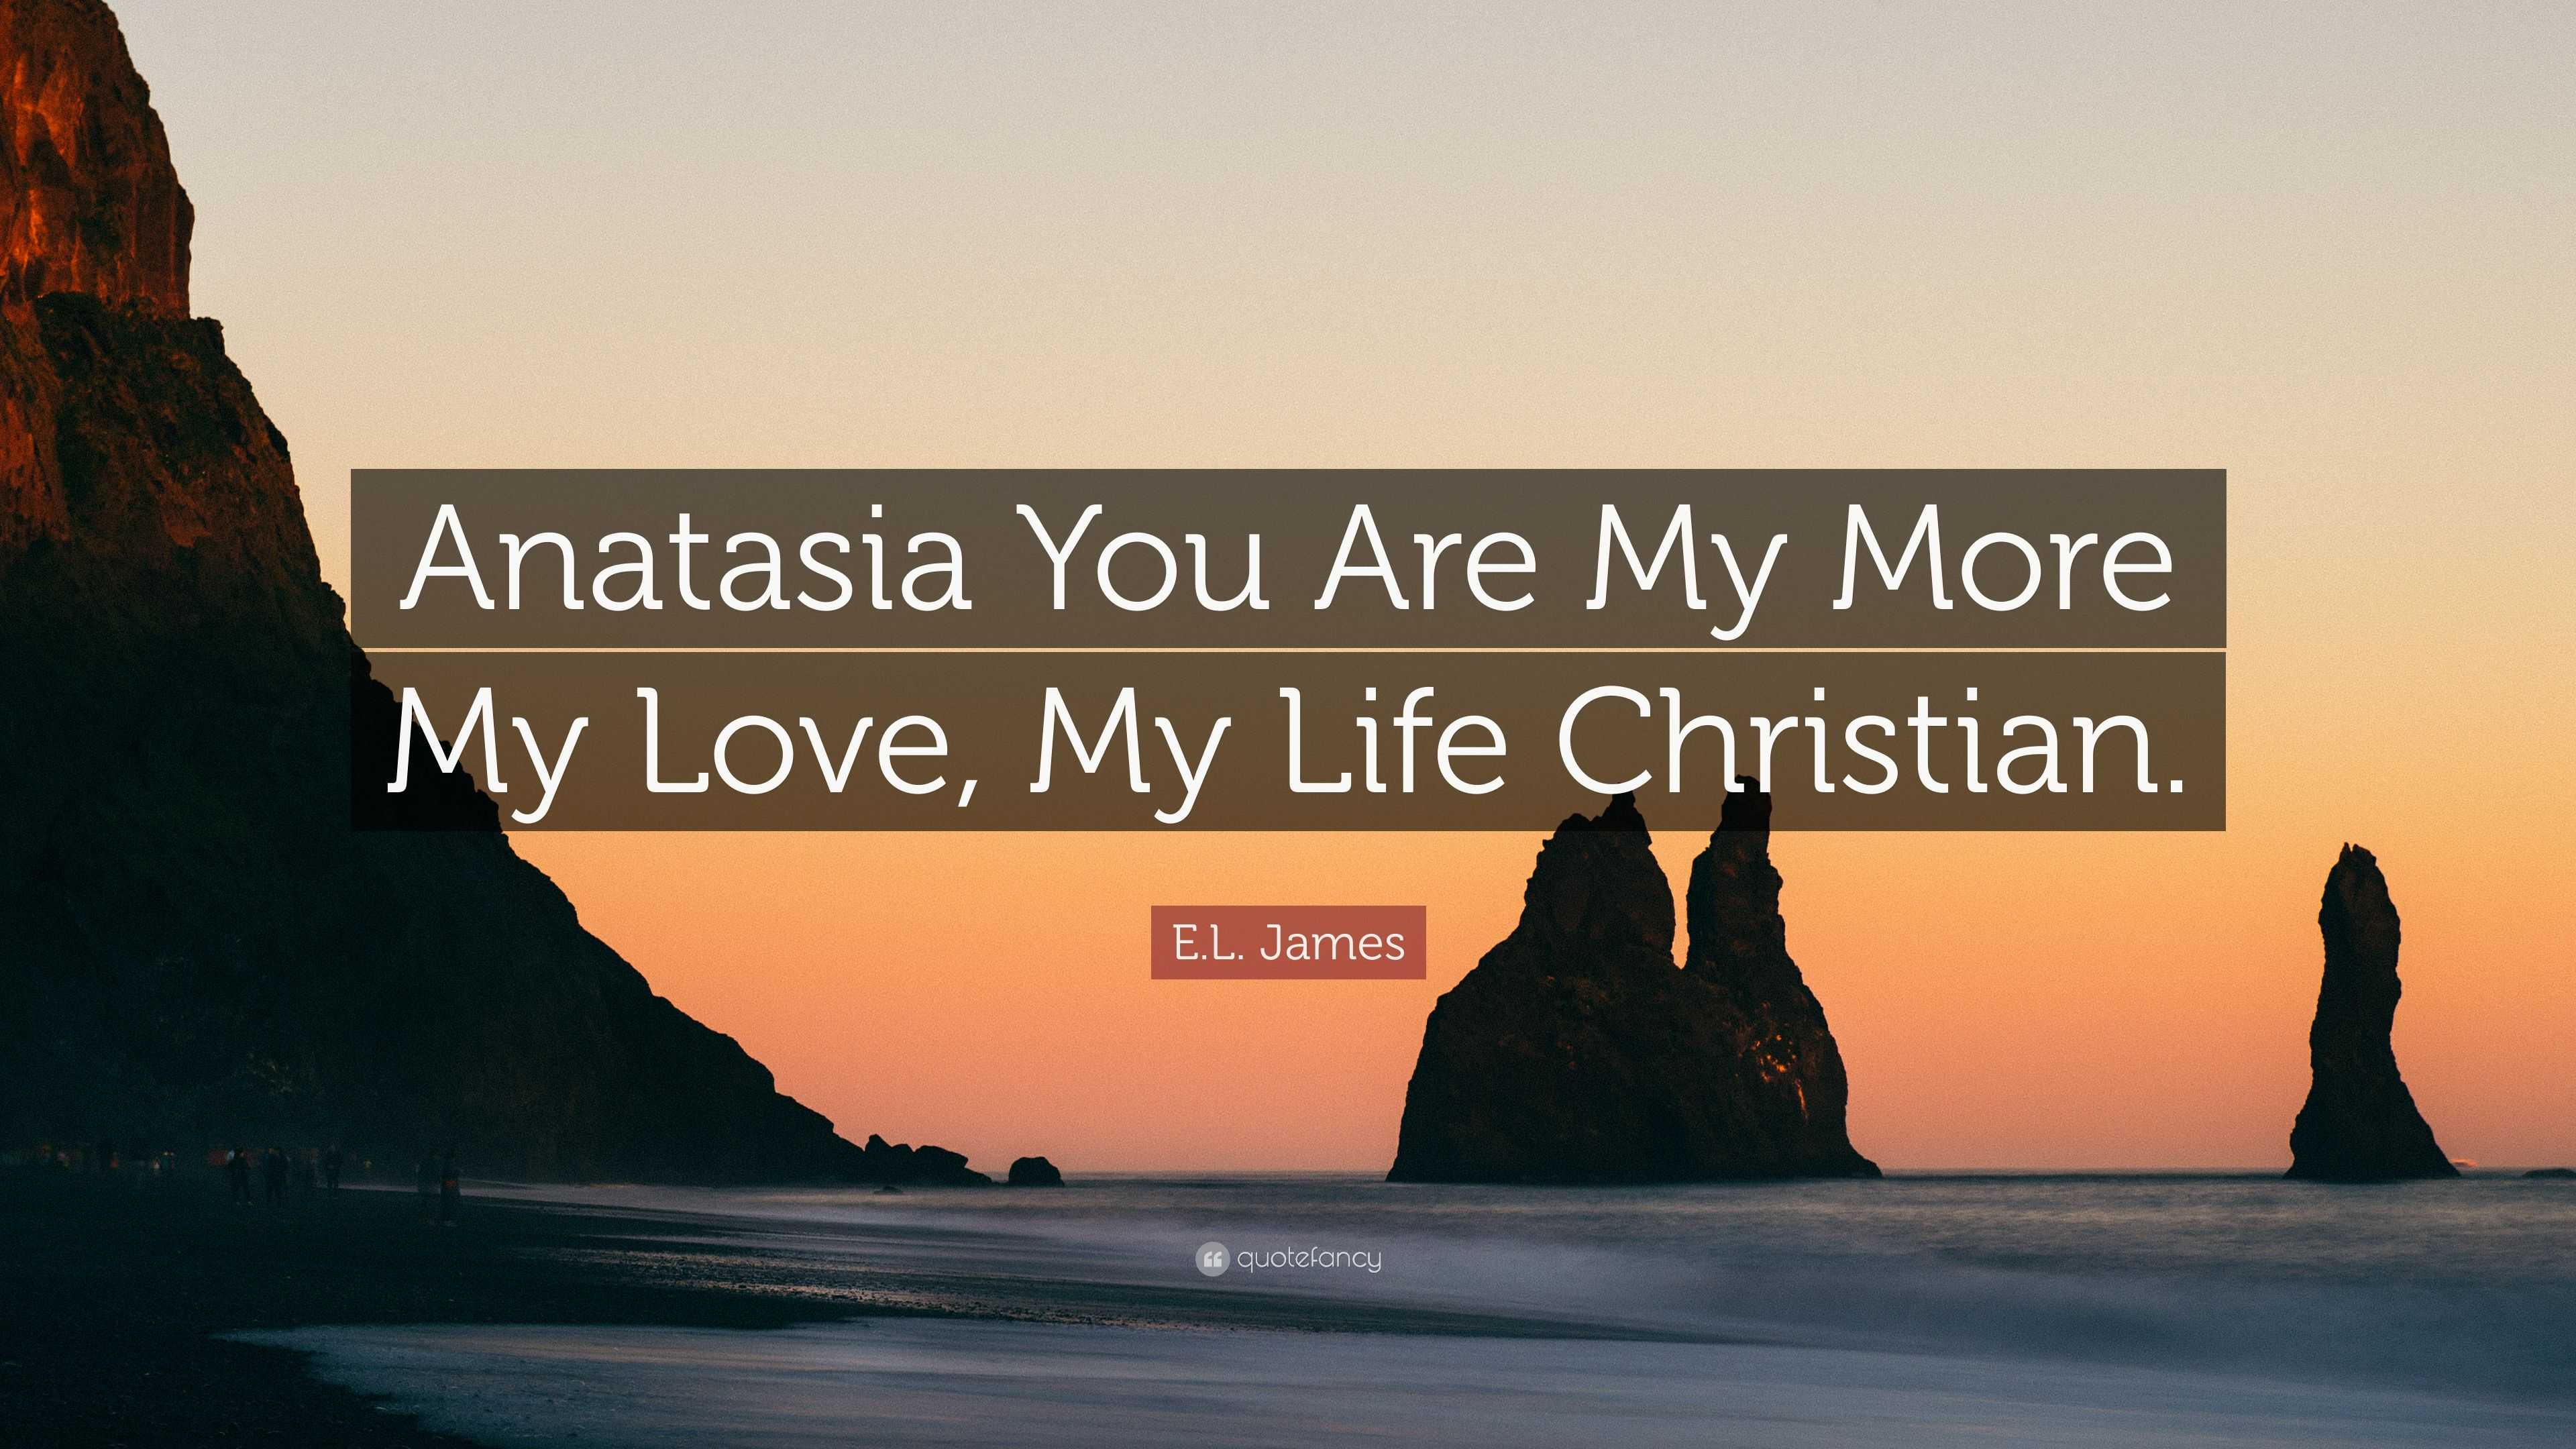 E L James Quote “Anatasia You Are My More My Love My Life Christian